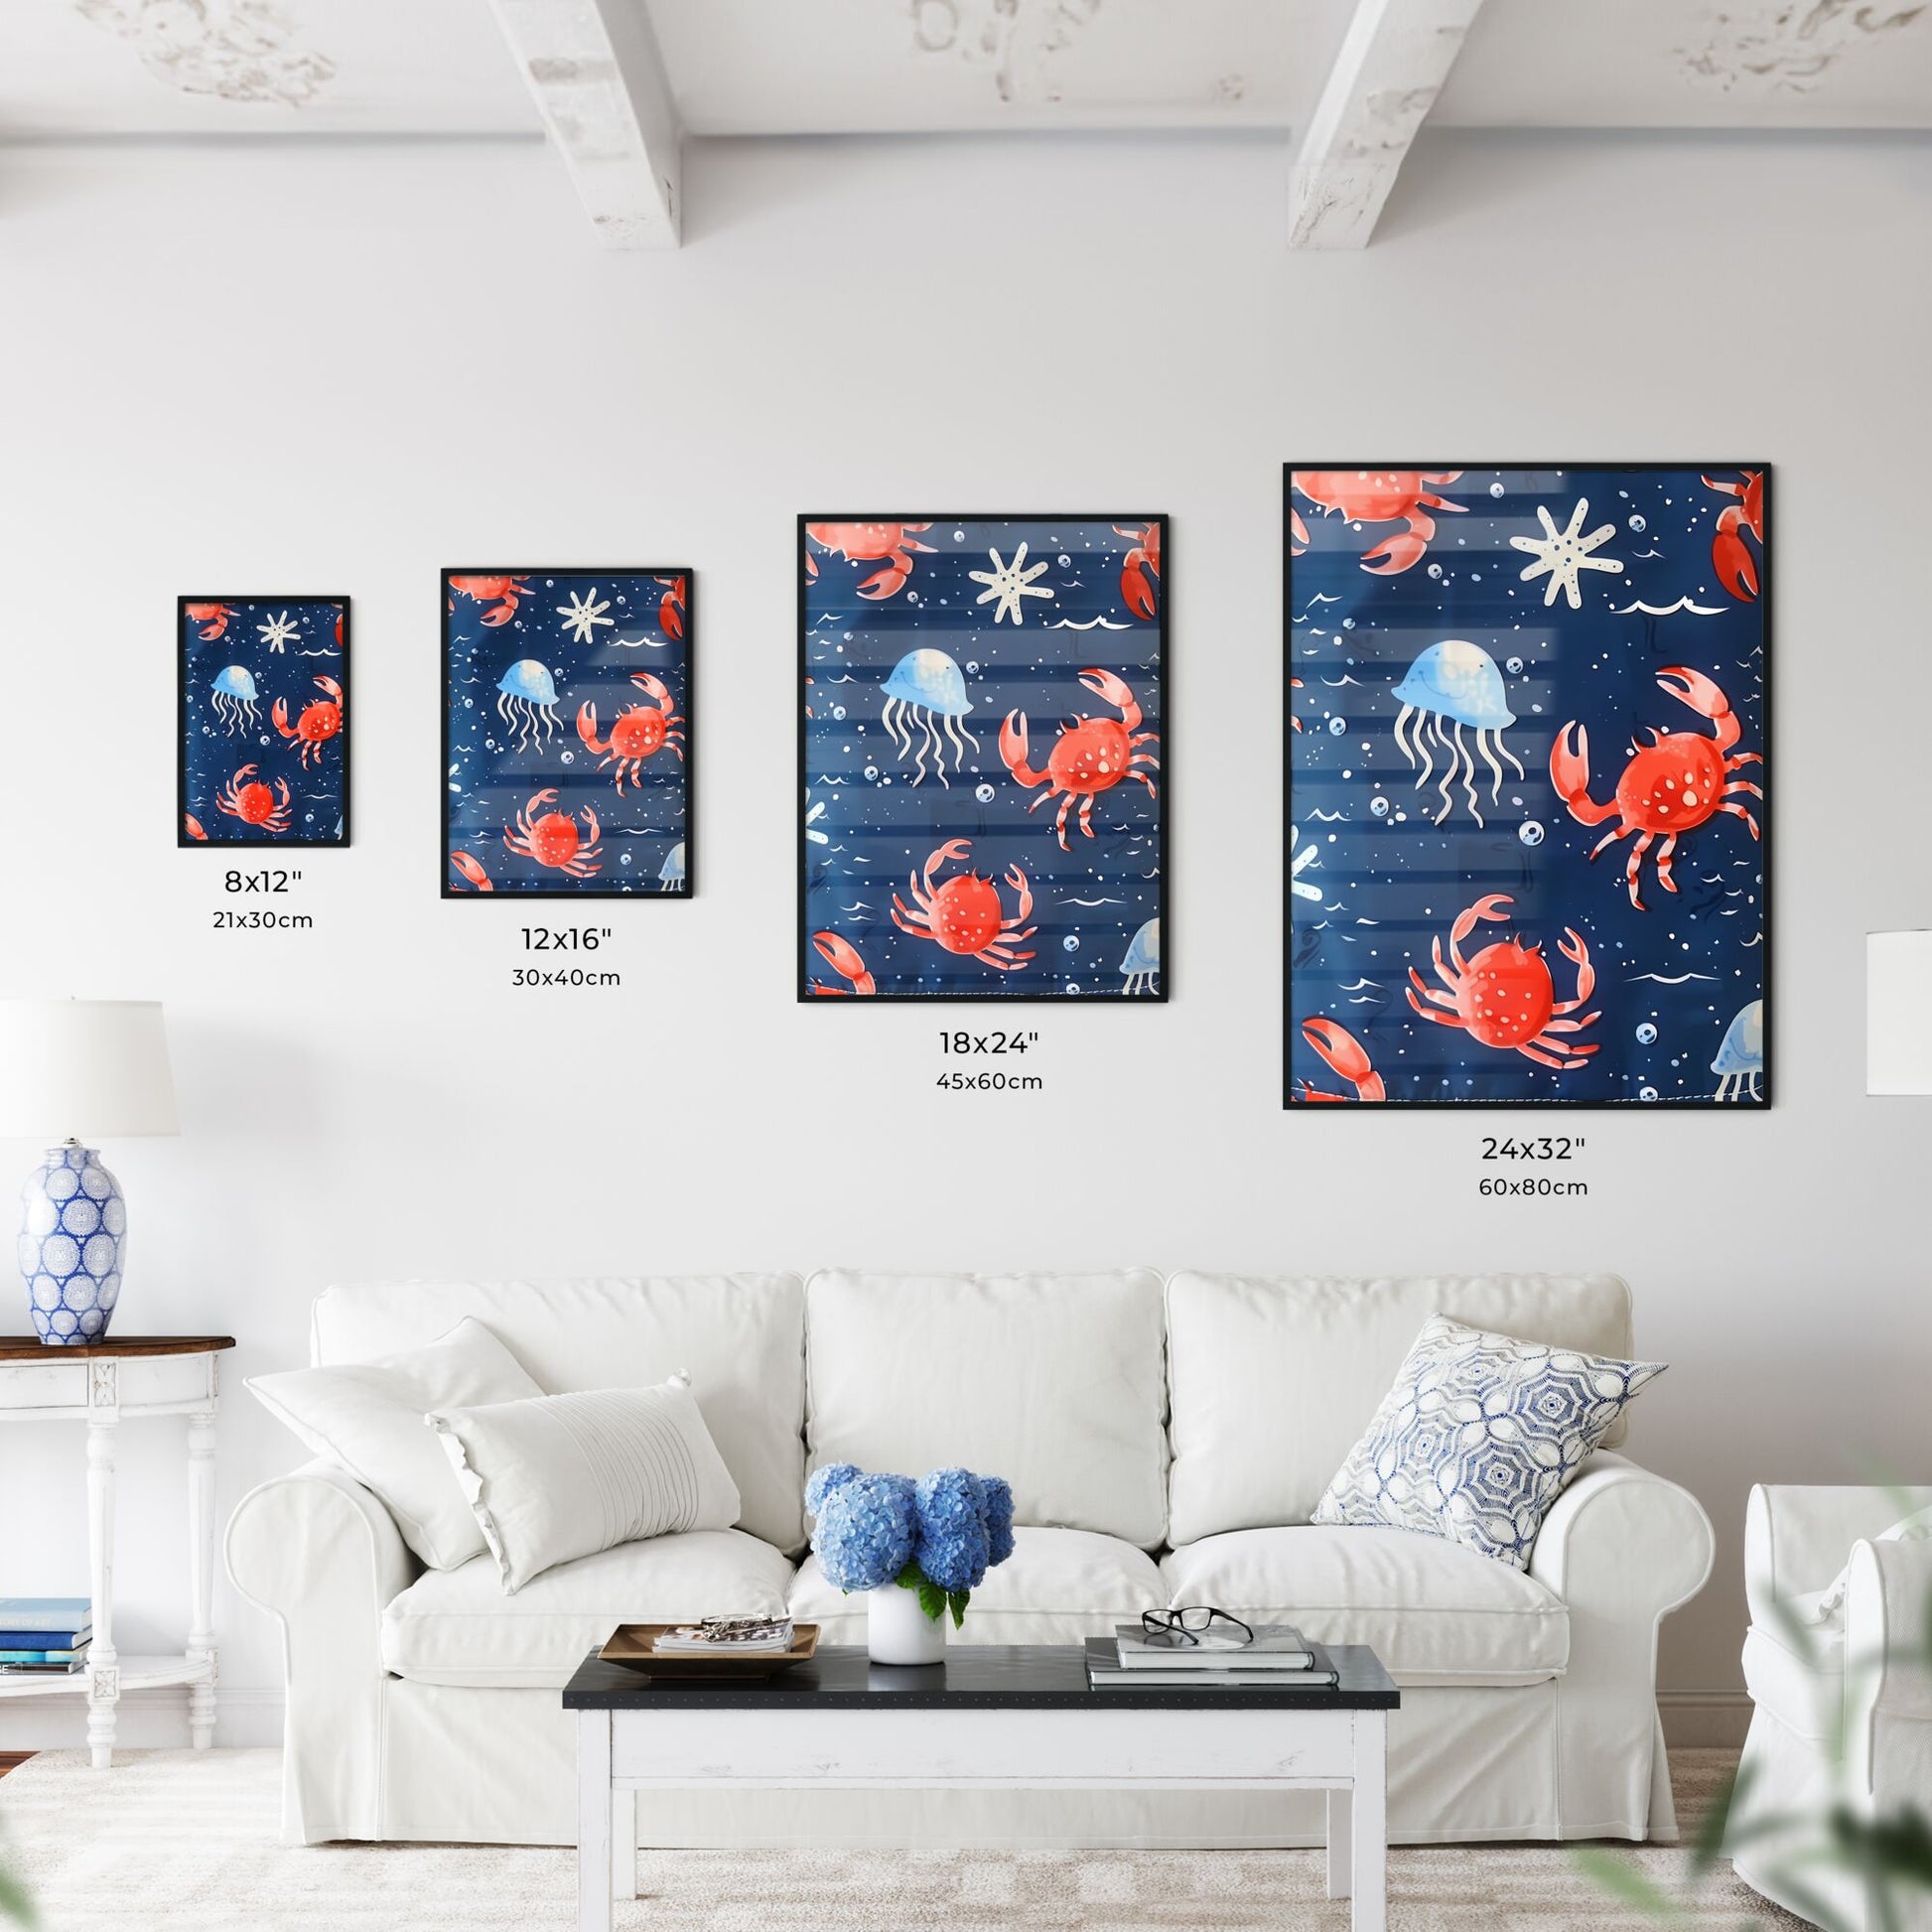 Vibrant Blue Fabric with Whimsical Sea Animals: Fish, Jellyfish, and Crabs Default Title